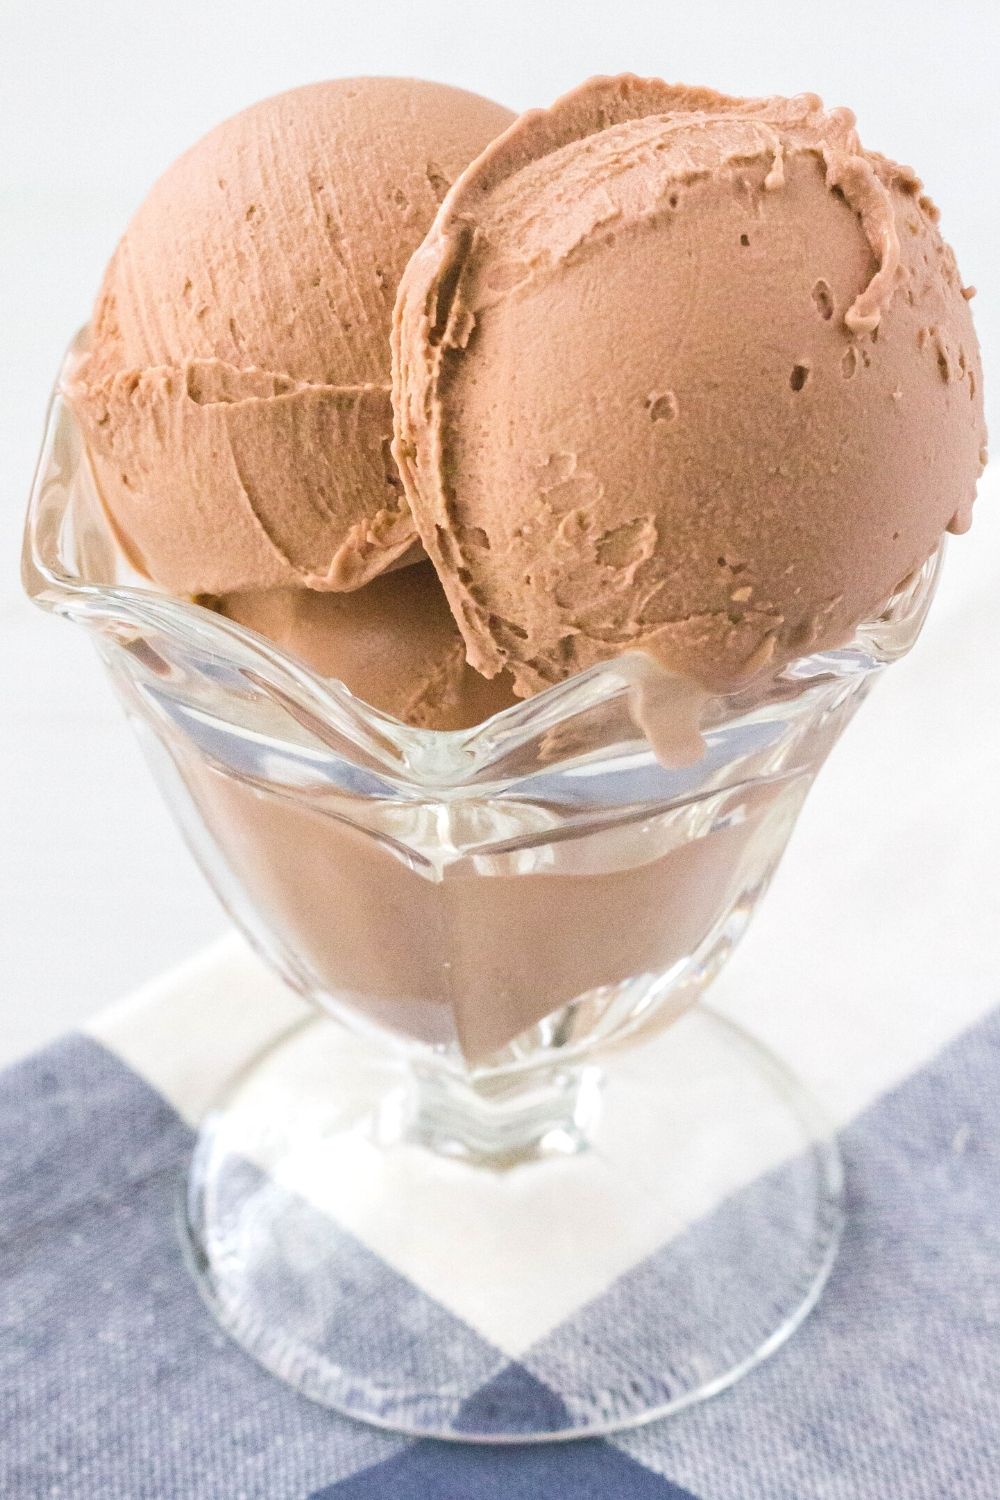 close-up side view of a dish serving scoops of Ninja Creami chocolate pudding ice cream.